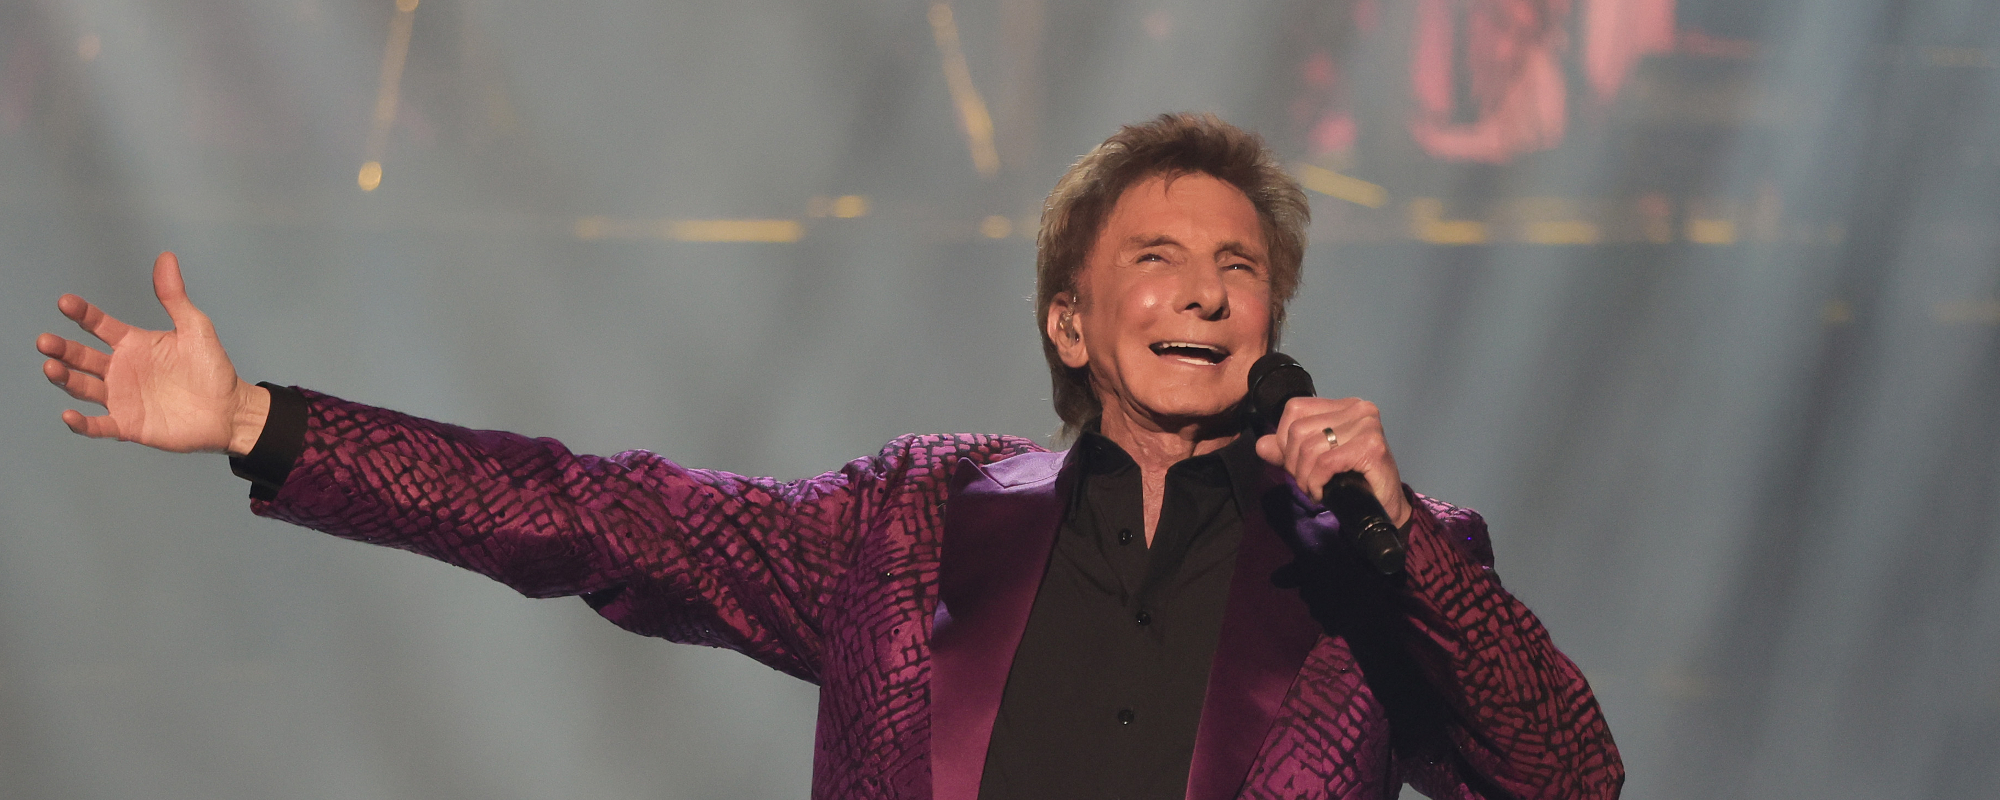 Barry Manilow Discloses Difficulty of Navigating Sexuality Amid Fame: “I Didn’t Want My Career to Go Away”